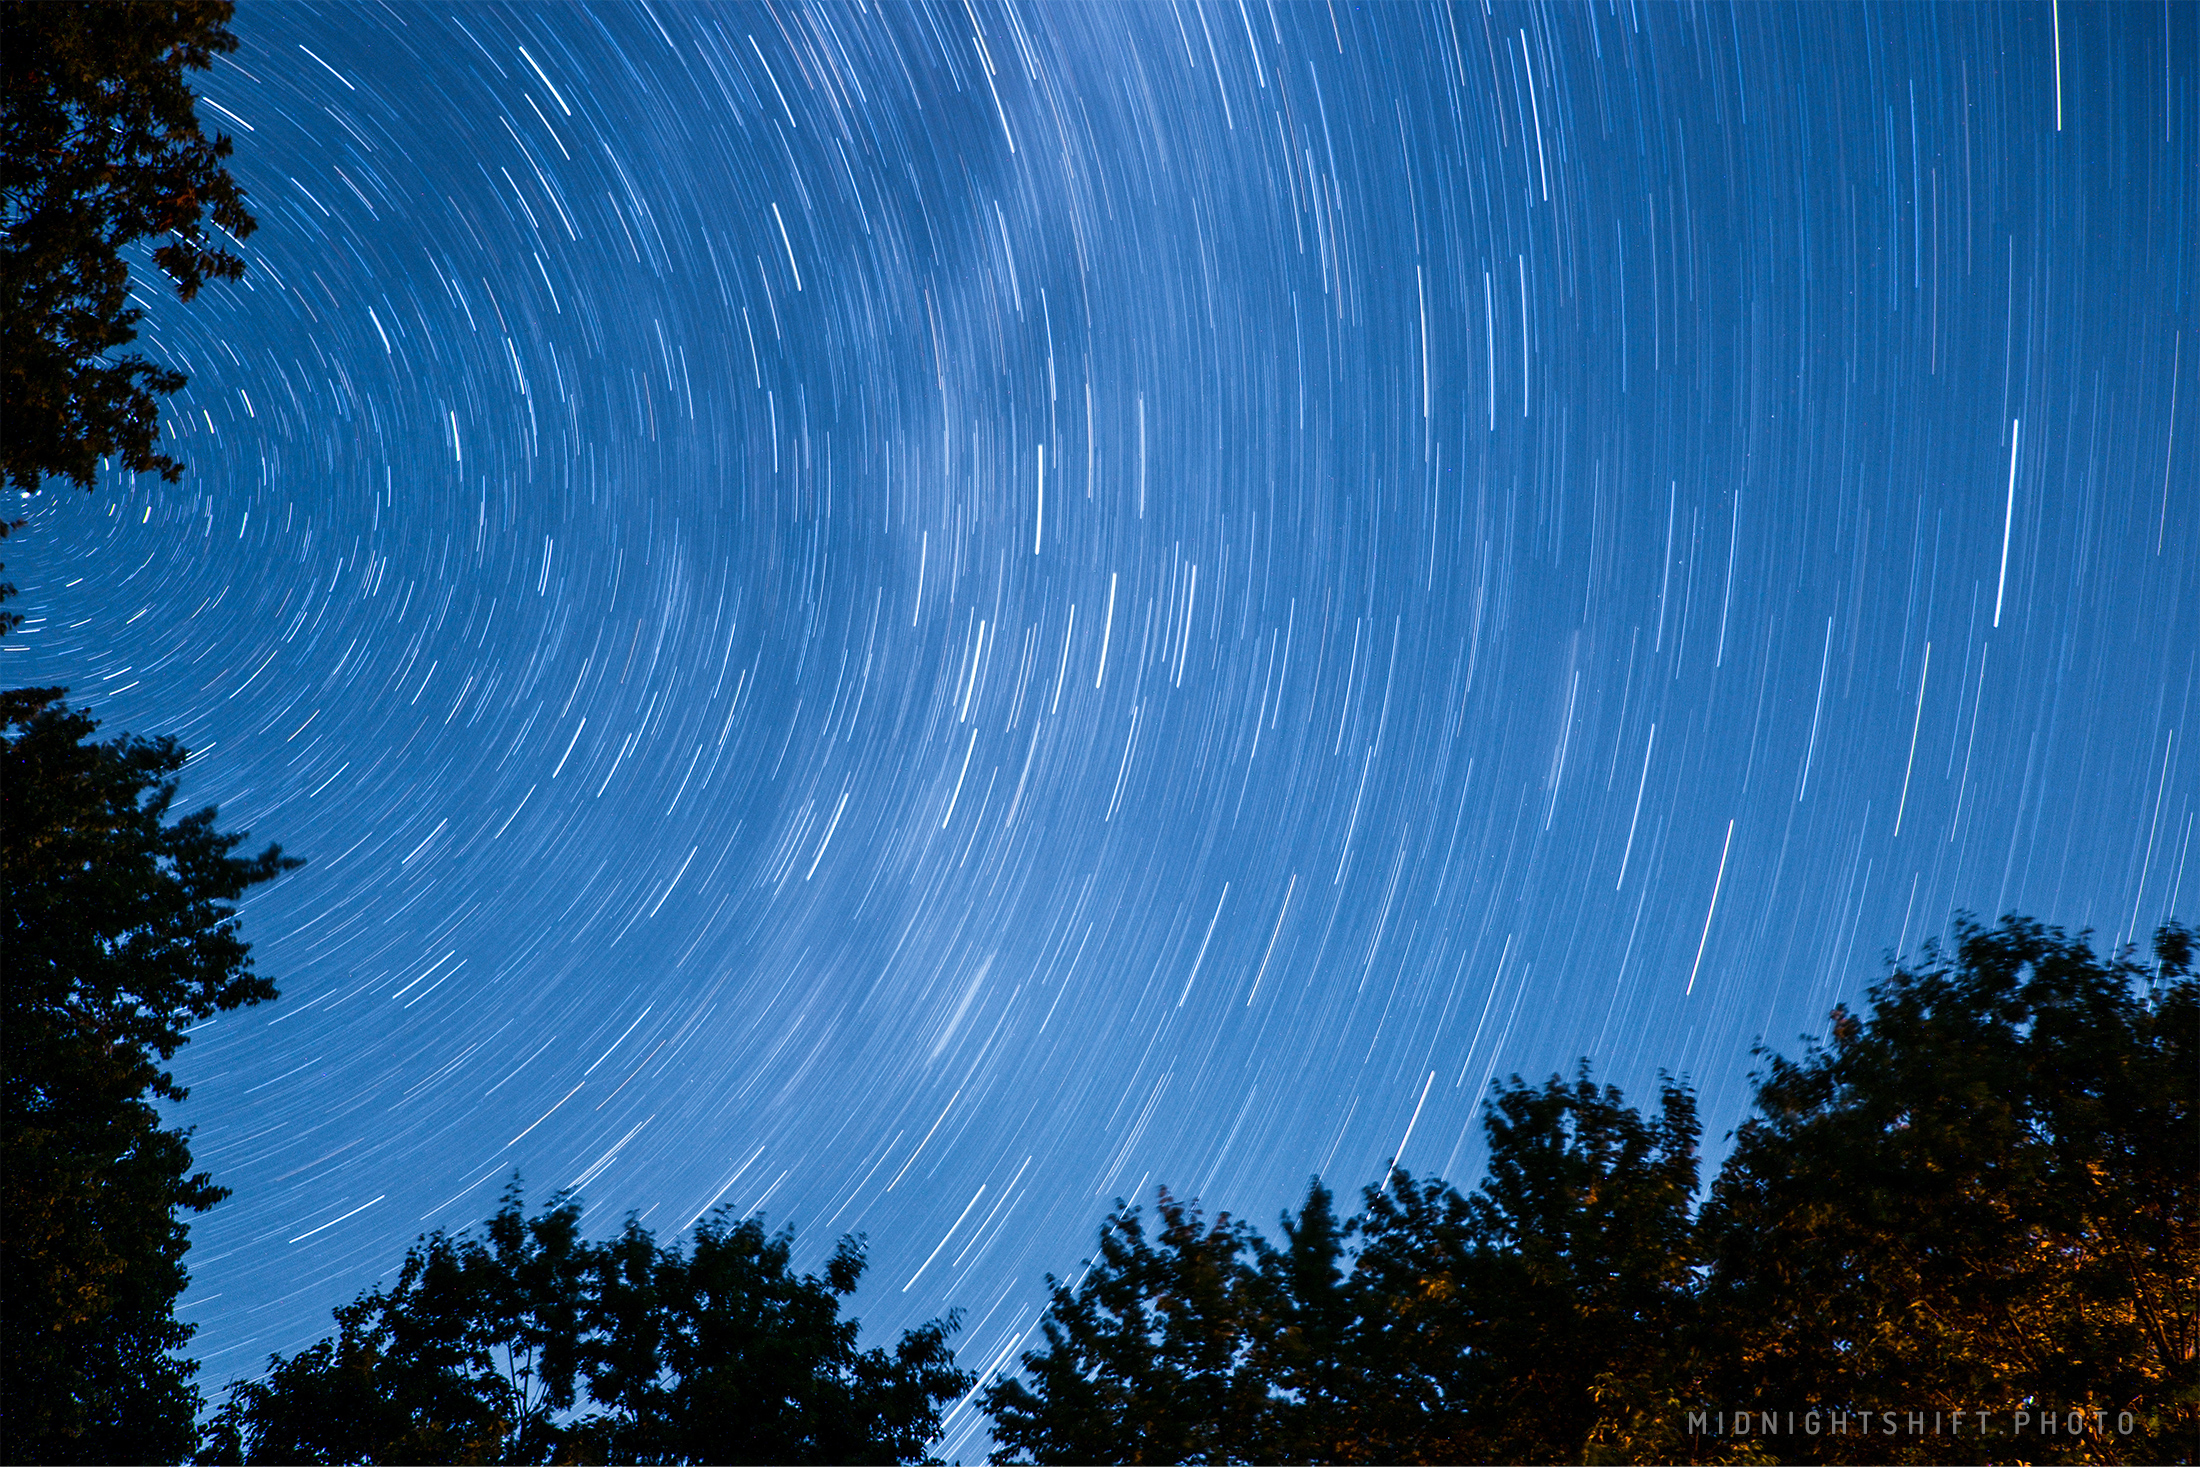 In the same location, I created this 28-minute exposure of the stars.